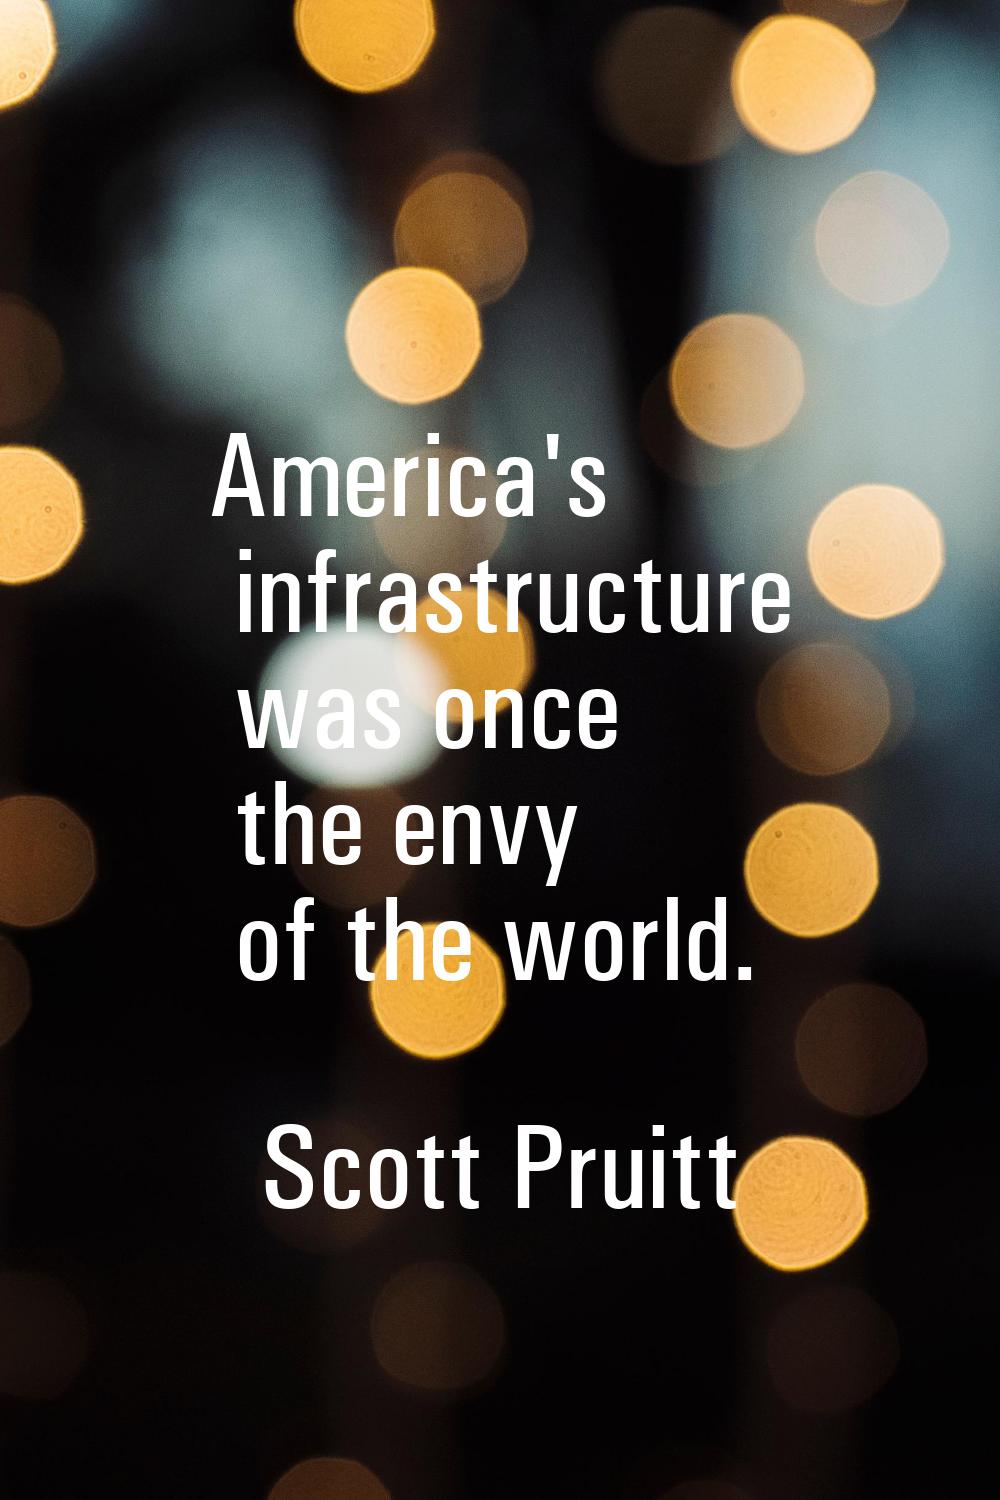 America's infrastructure was once the envy of the world.